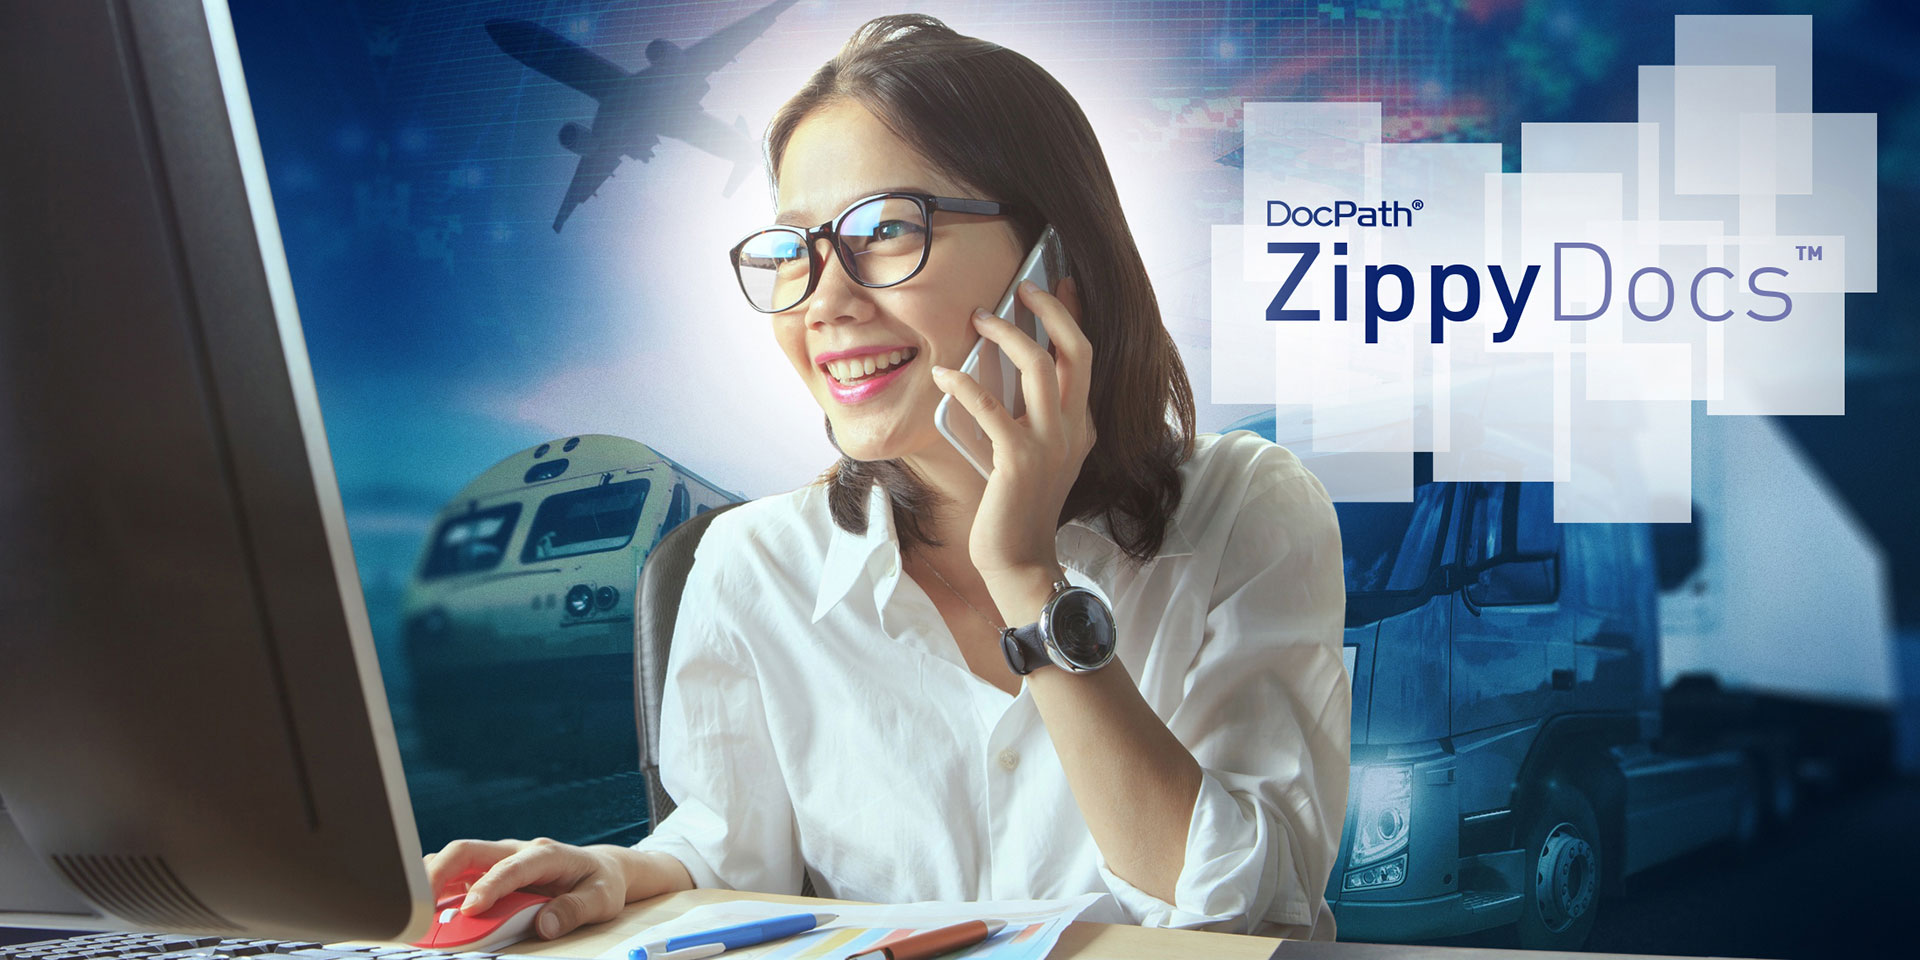 DocPath ZippyDocs – The logistic industry is going through important digital transformation